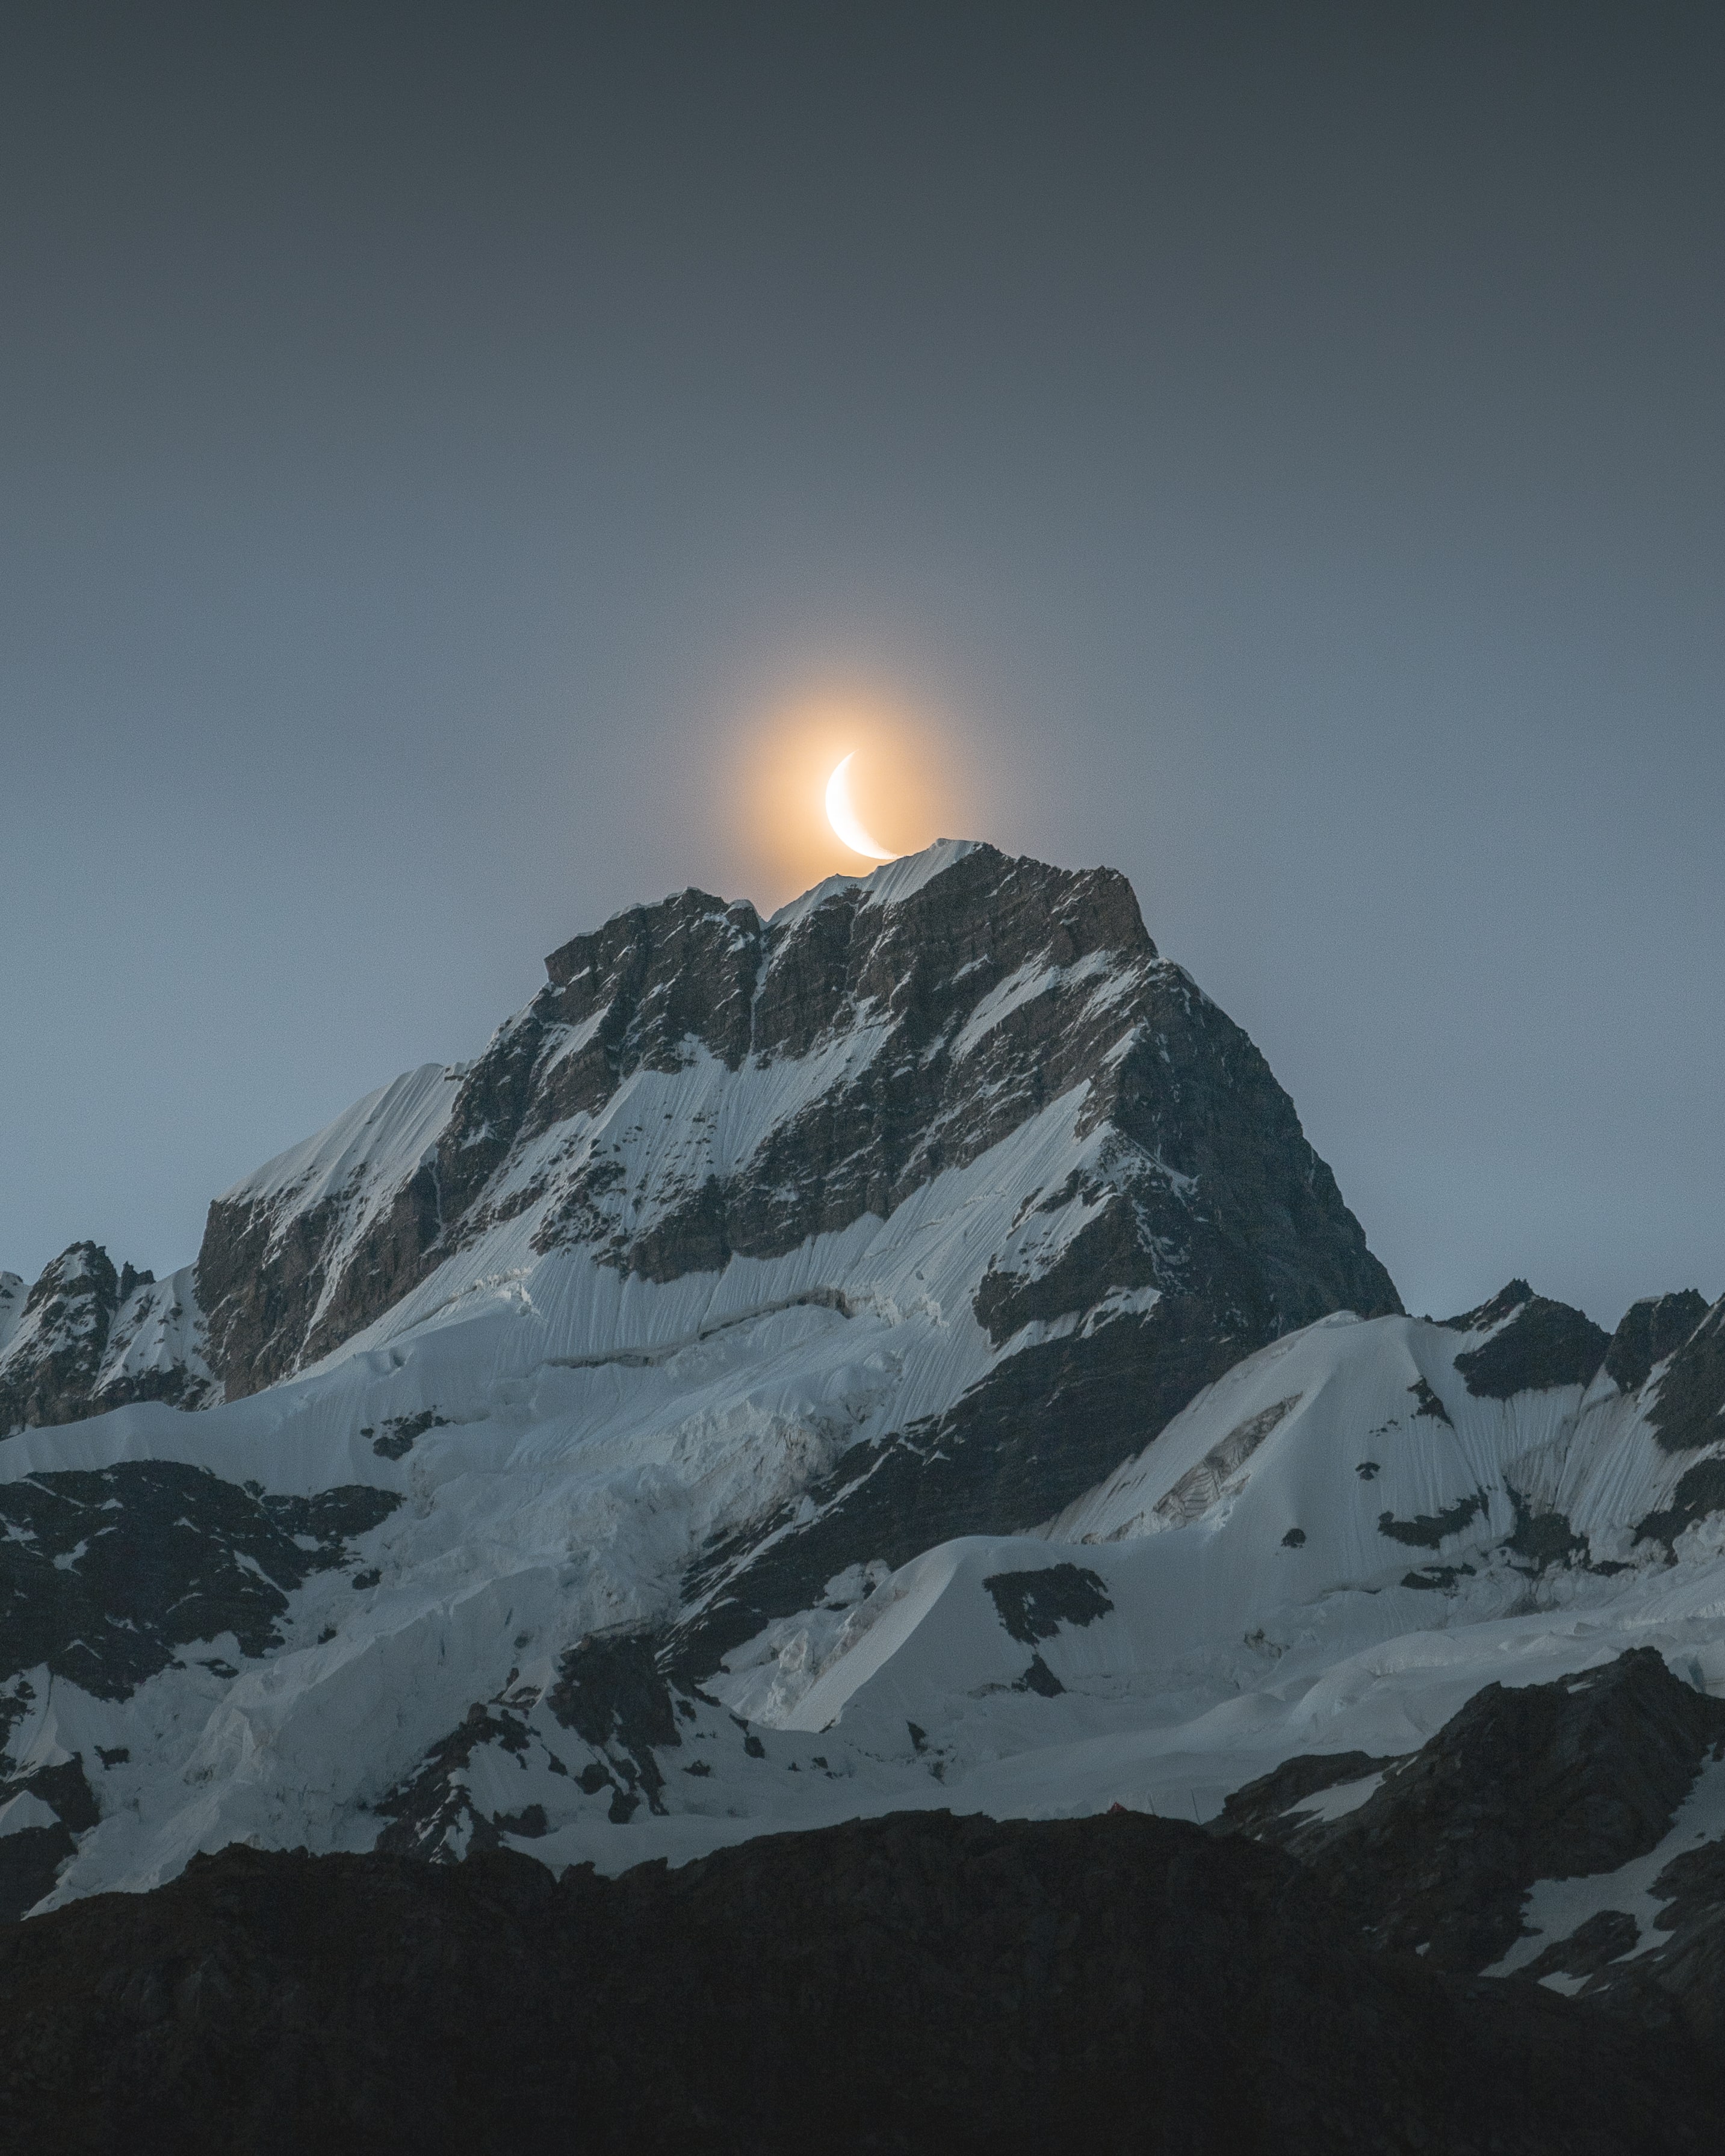 crescent moon glowing behind mountain